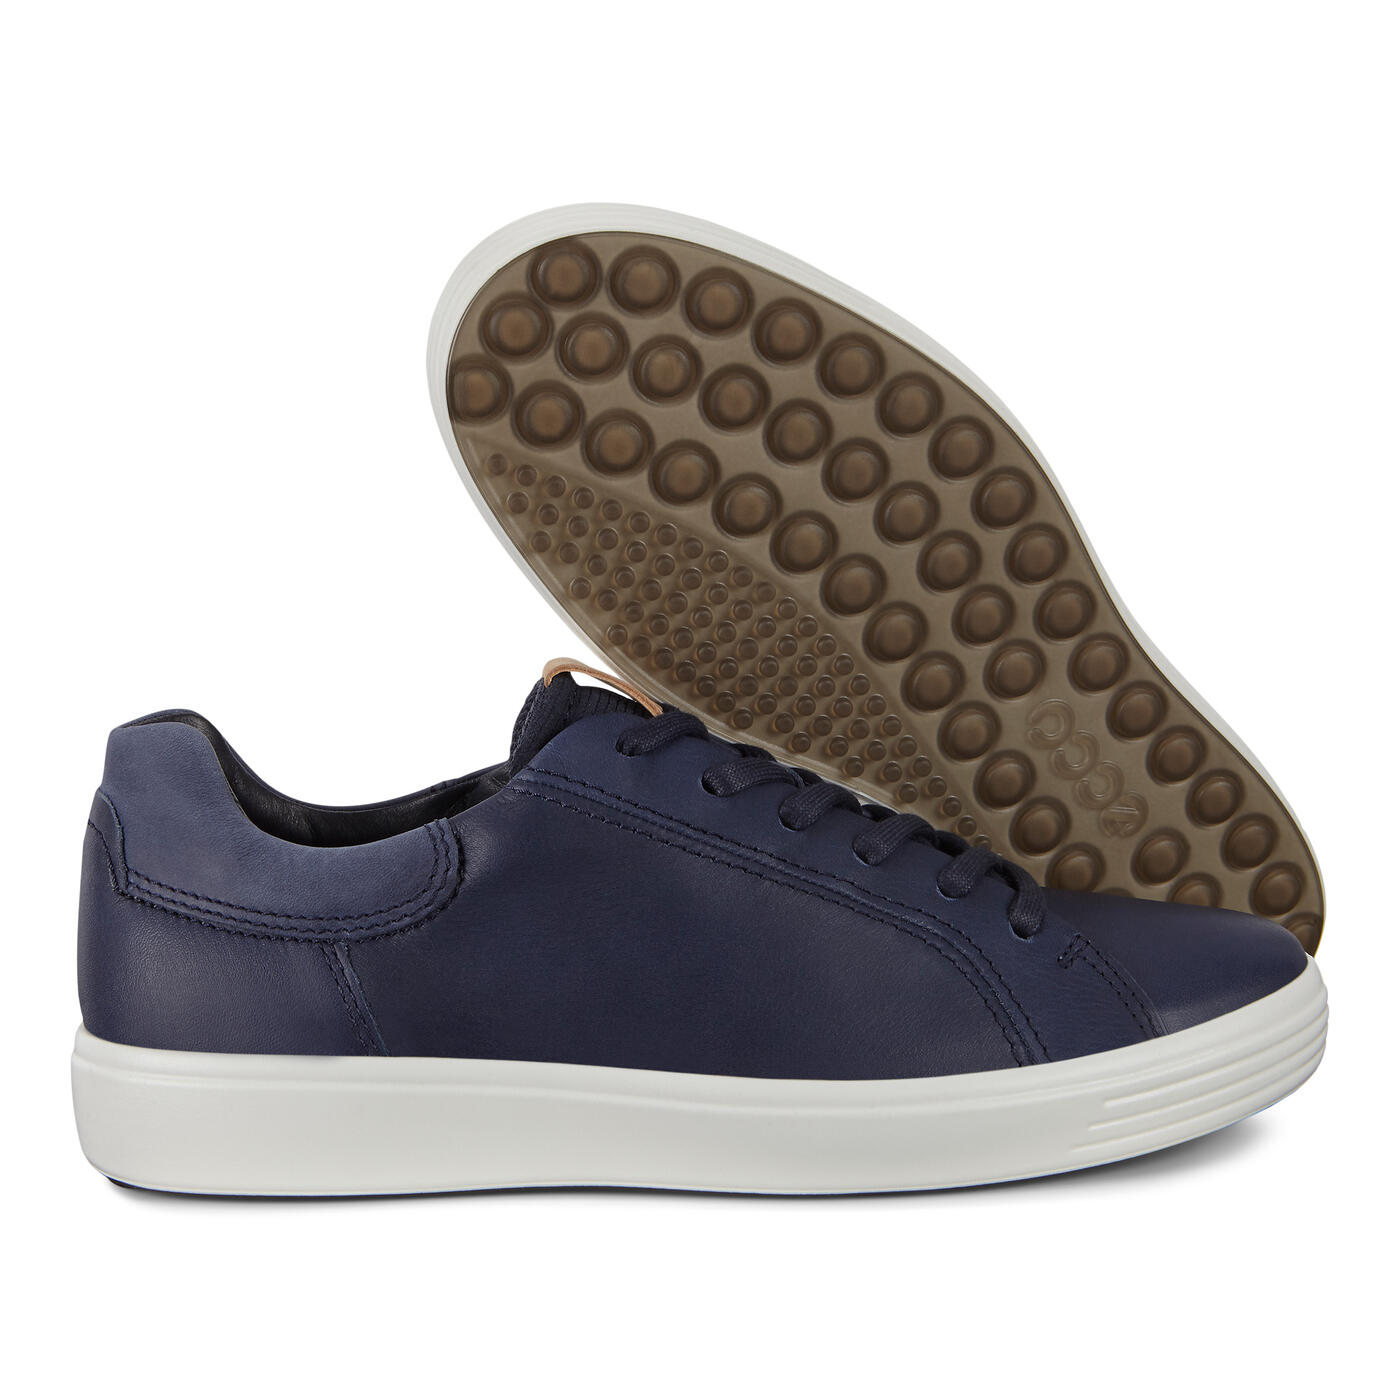 Men's Soft 7 Street Sneakers | Official Store | ECCO® Shoes